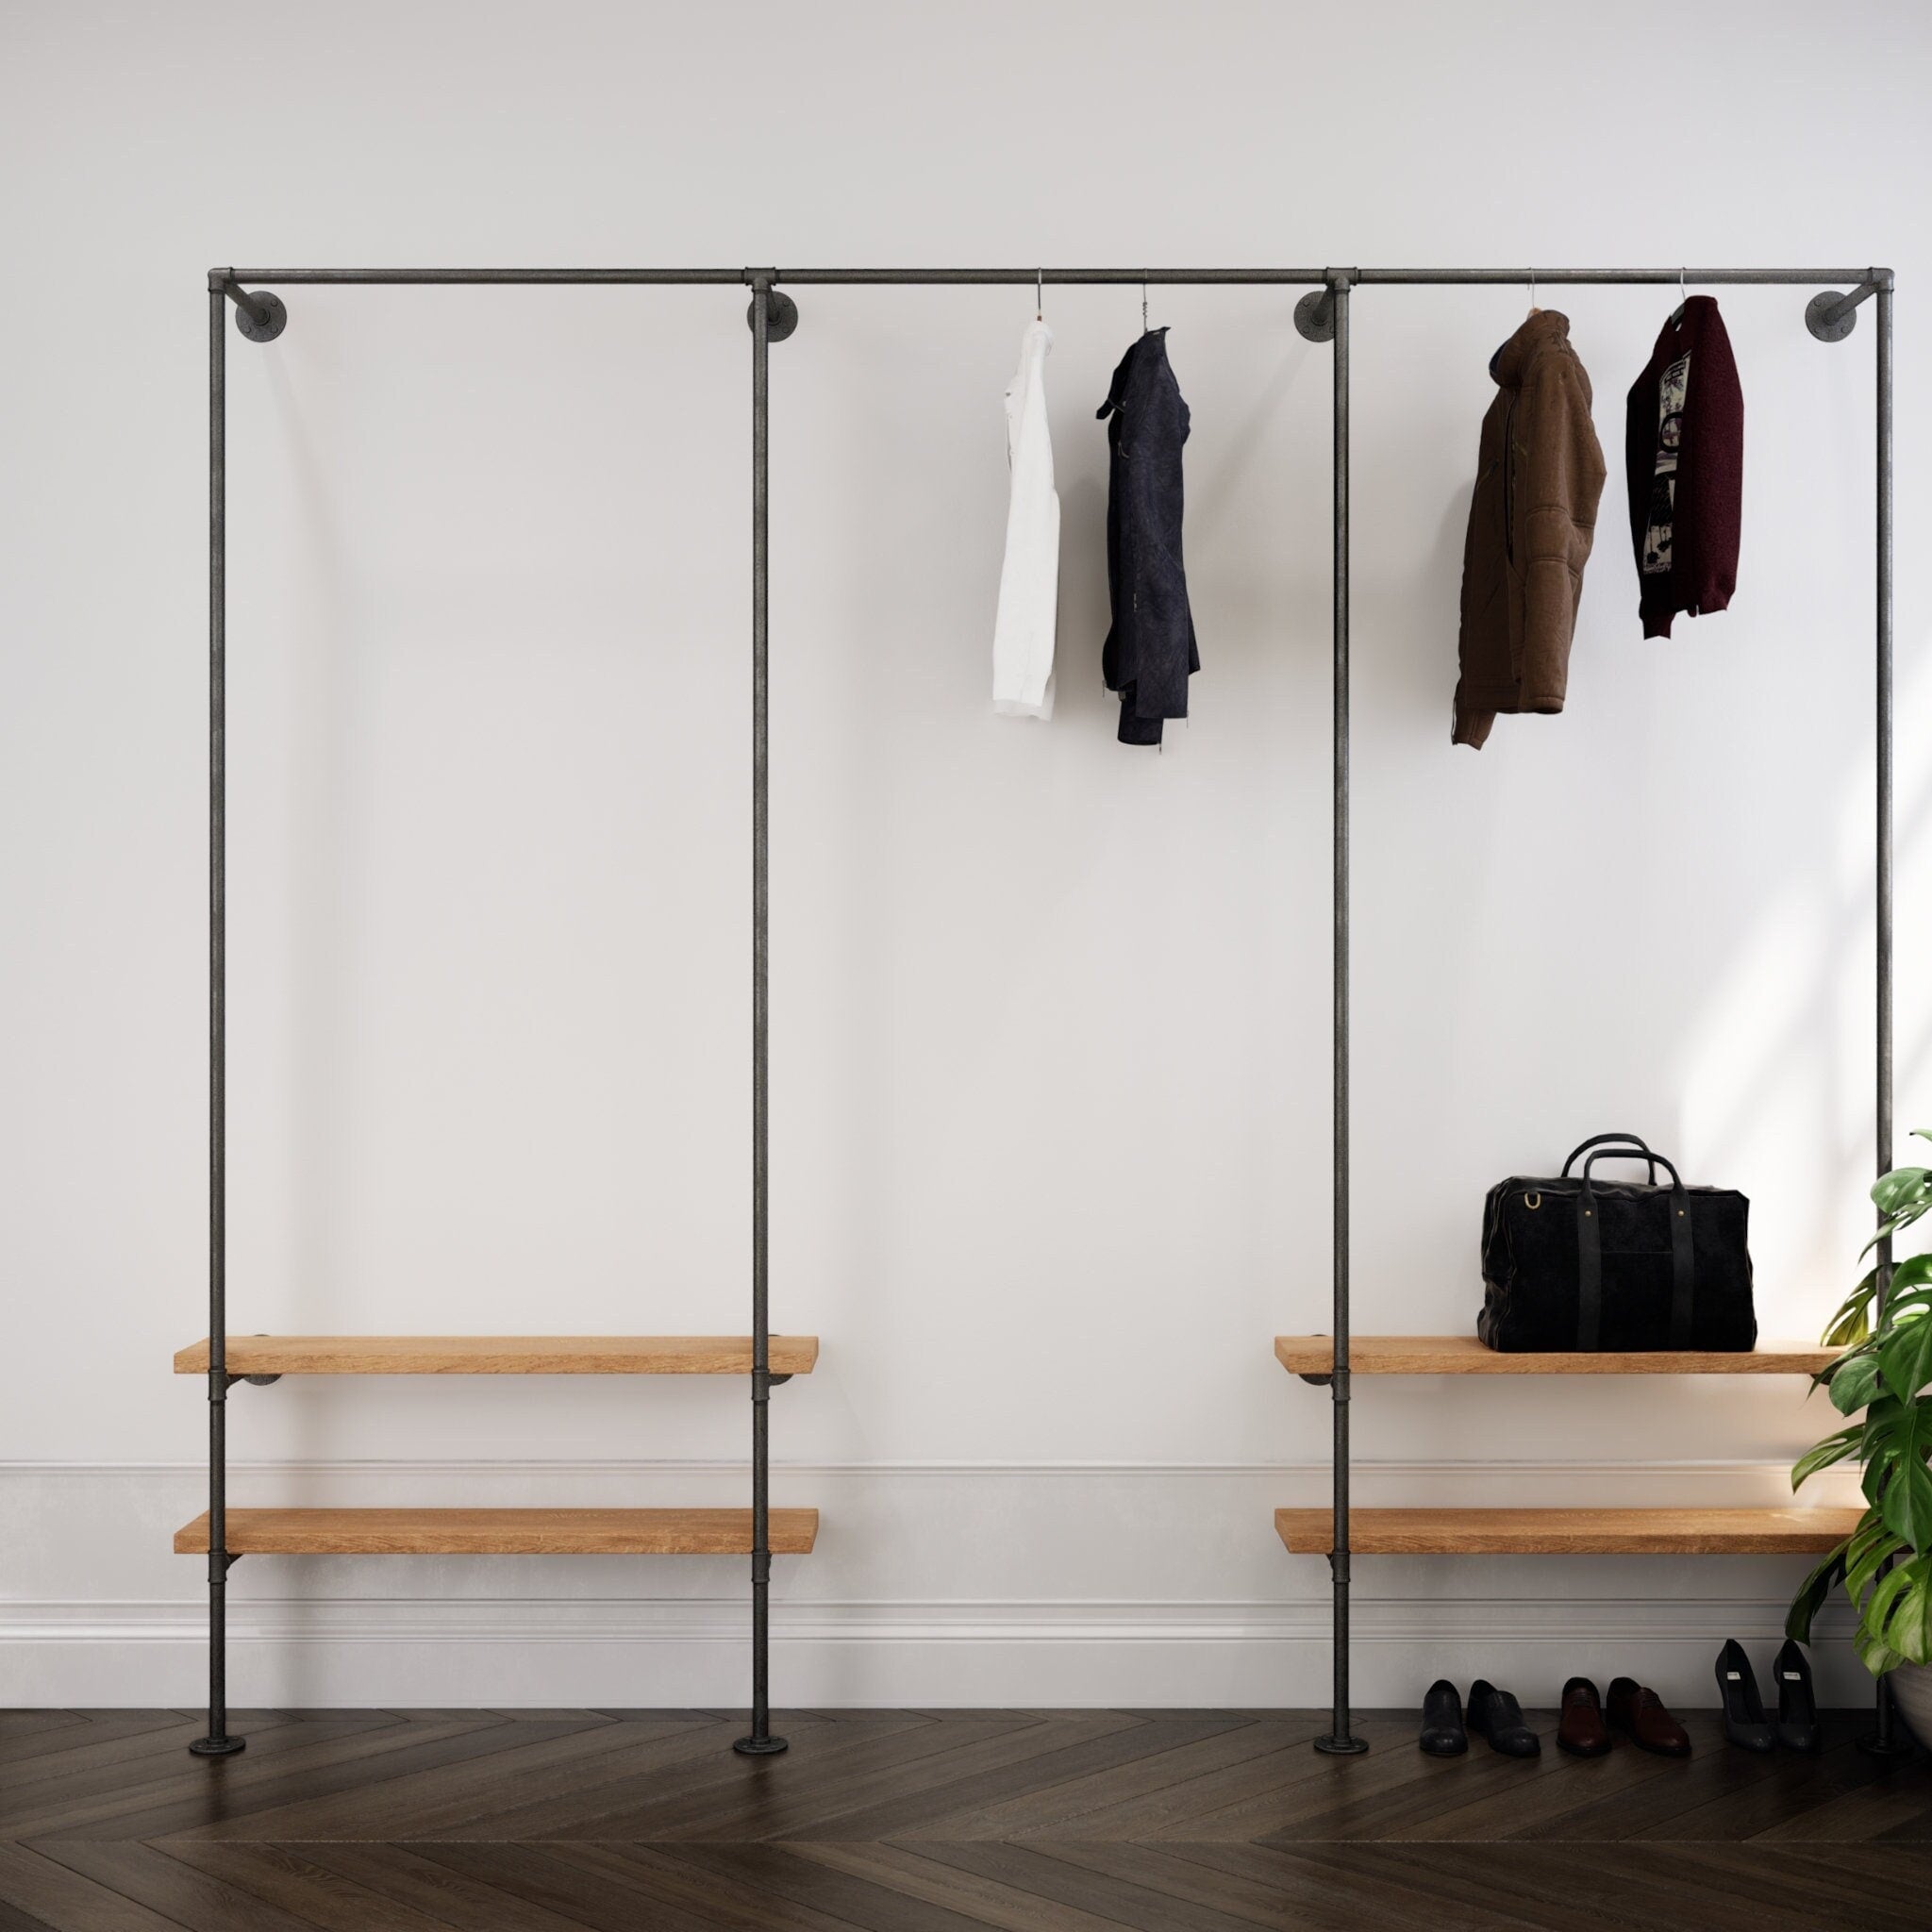 A versatile Walk-In Open Wardrobe System with clothes rack and hanging rail, highlighting its open closet design.